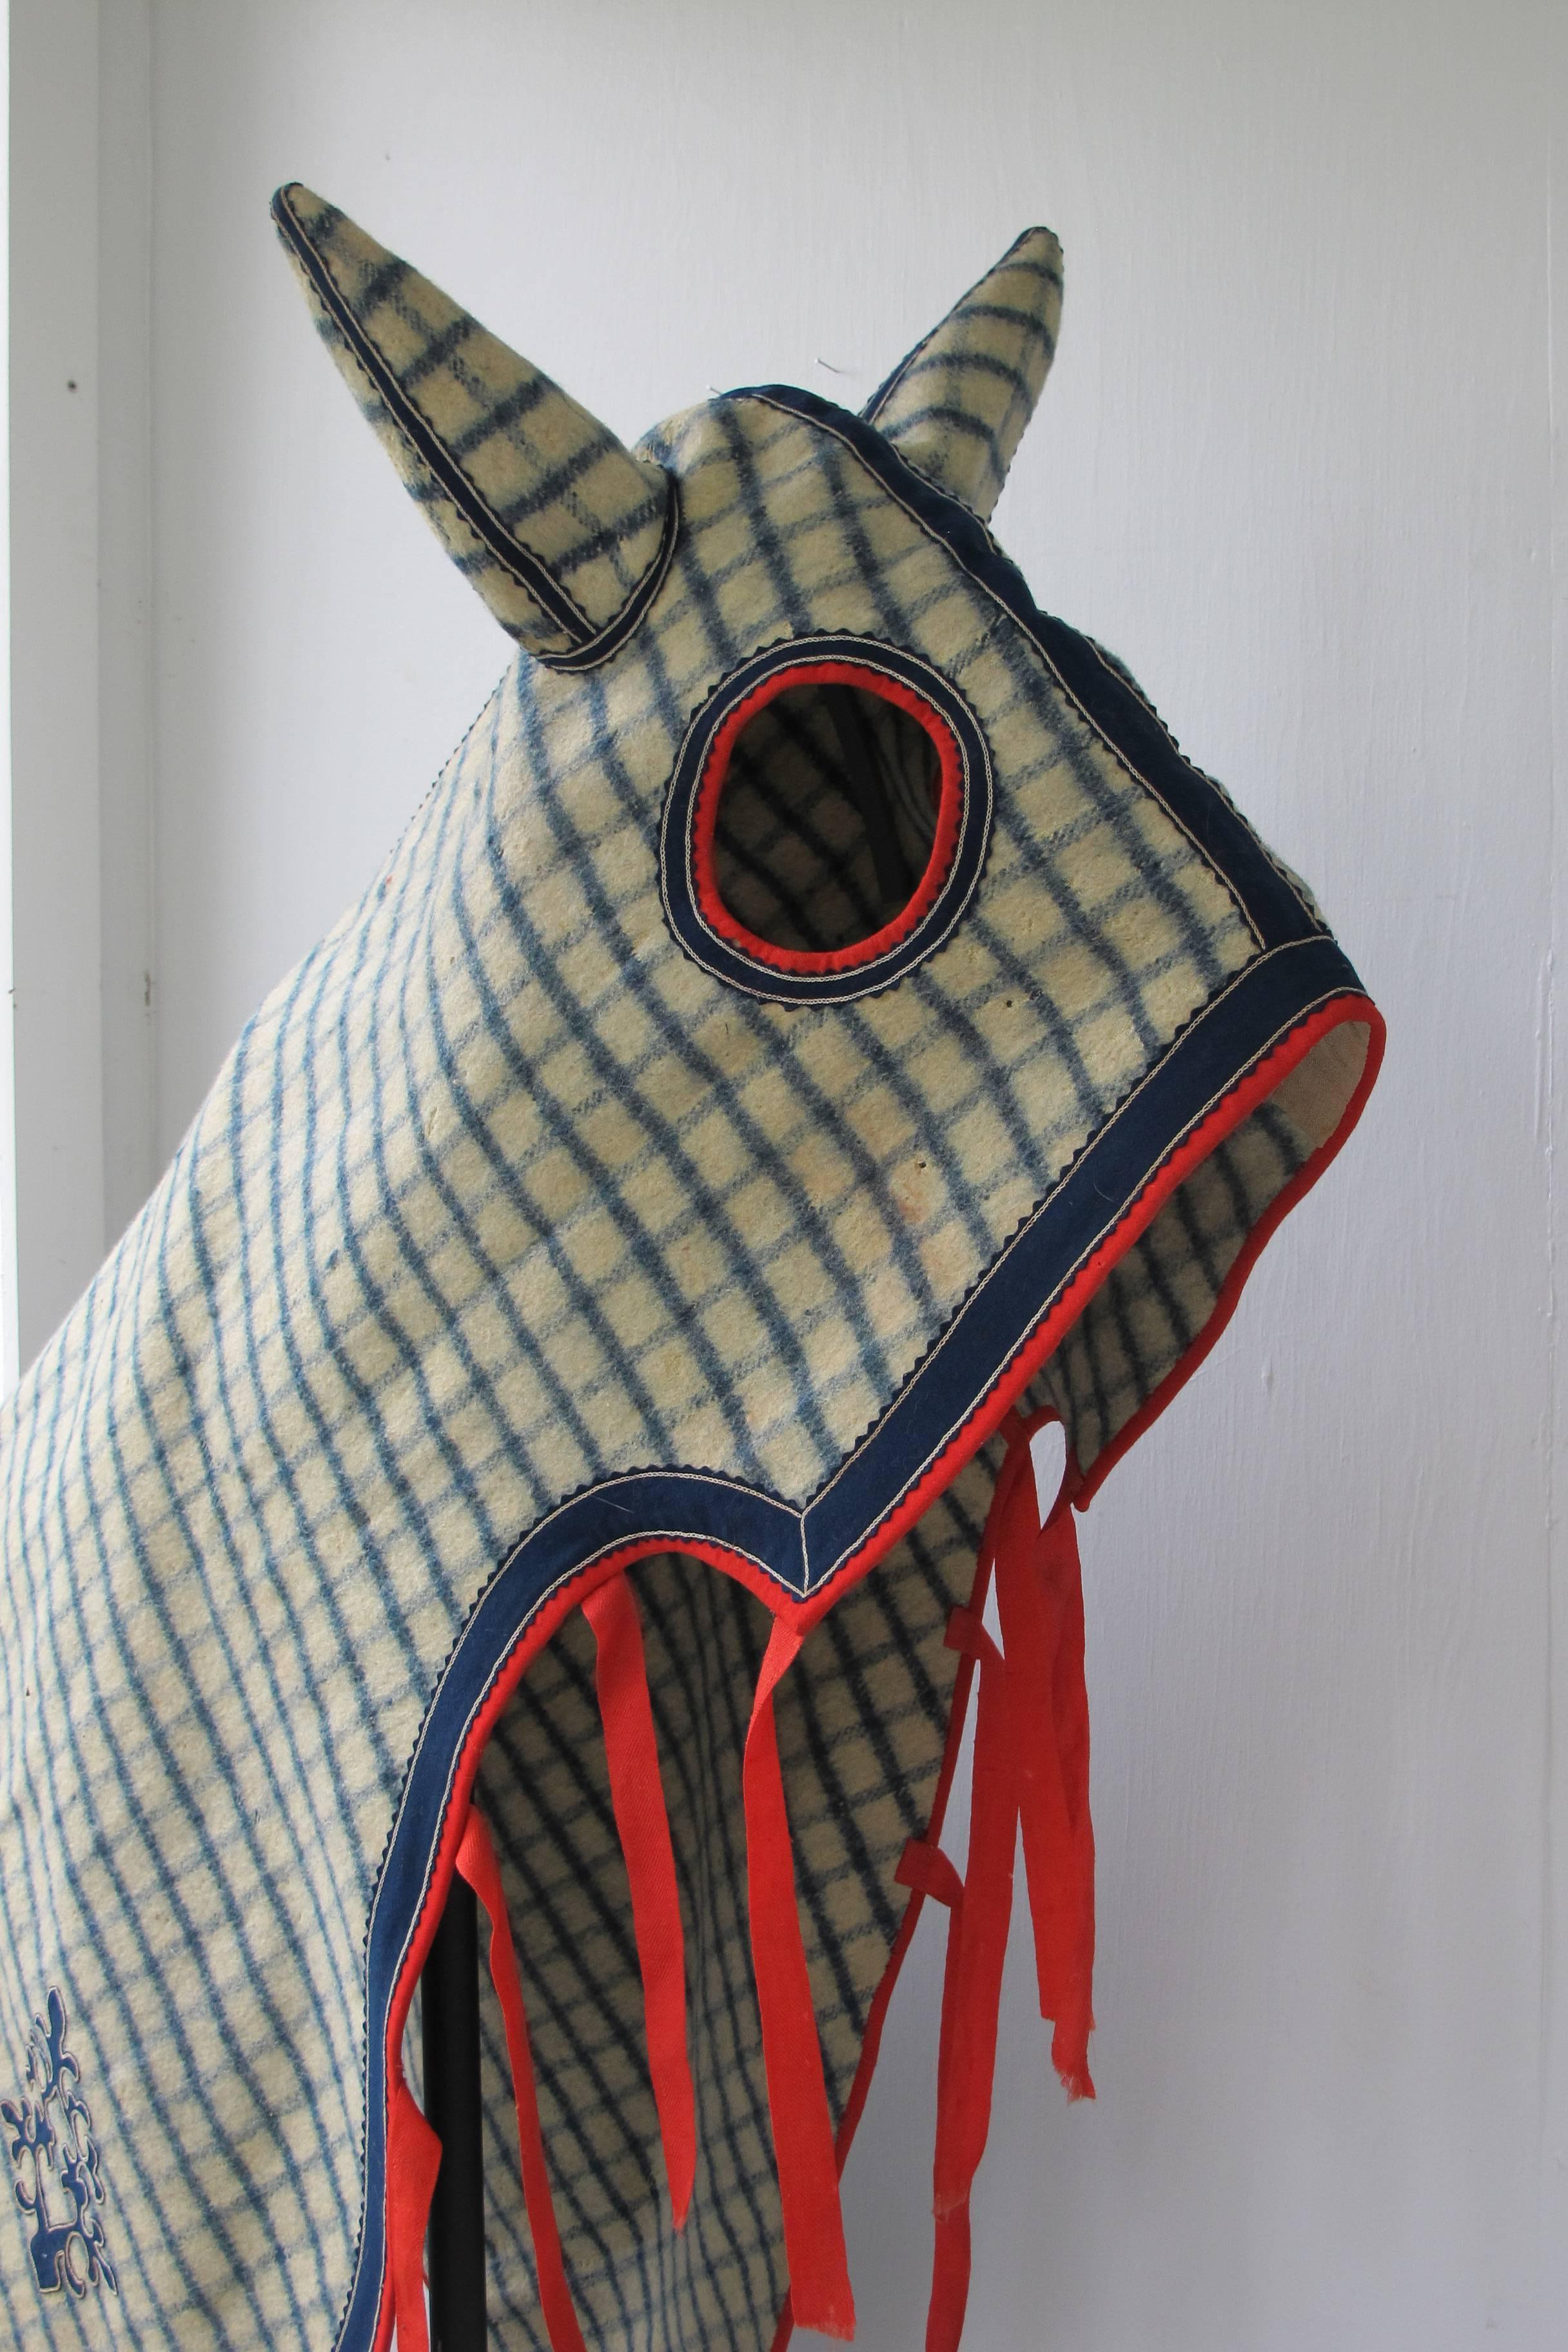 Well made wool horse blanket with head covering to keep biting horse flies away from vulnerable part of the horse. I'm told thoroughbred horses are especially irritated by the biting flies at times. This is an especially stylish horse cover with a